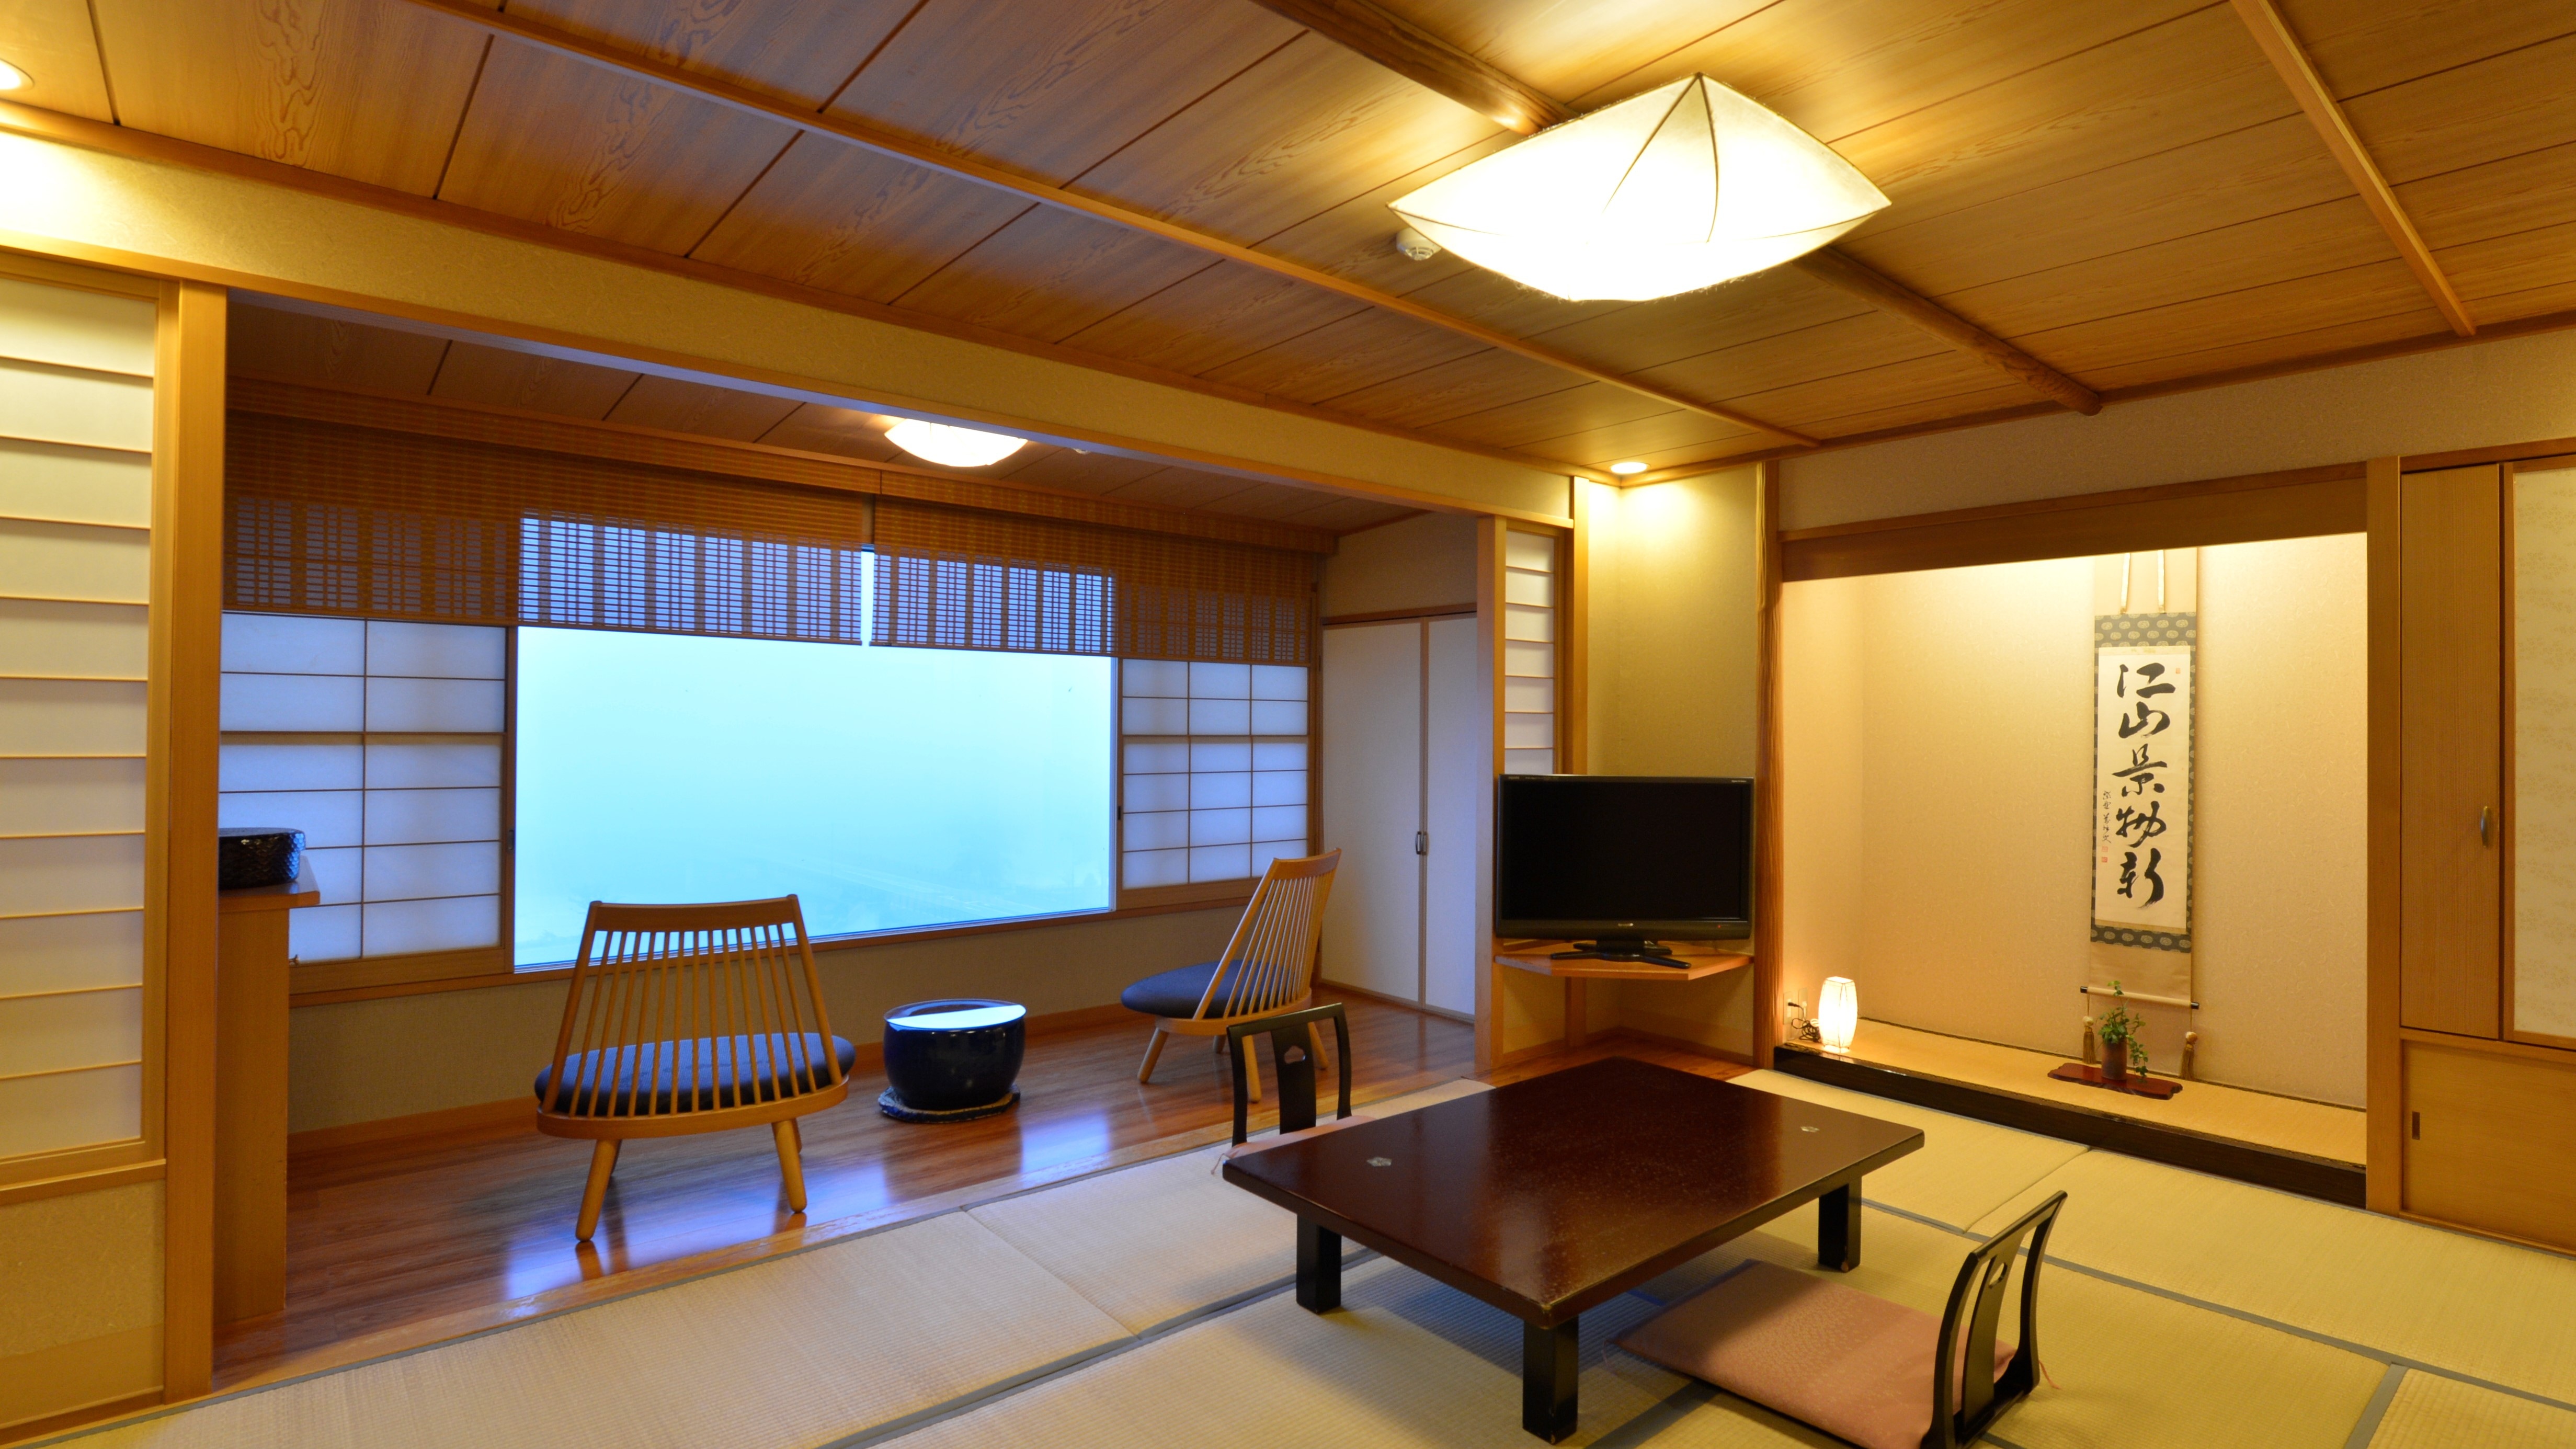 An example of a Japanese classic room